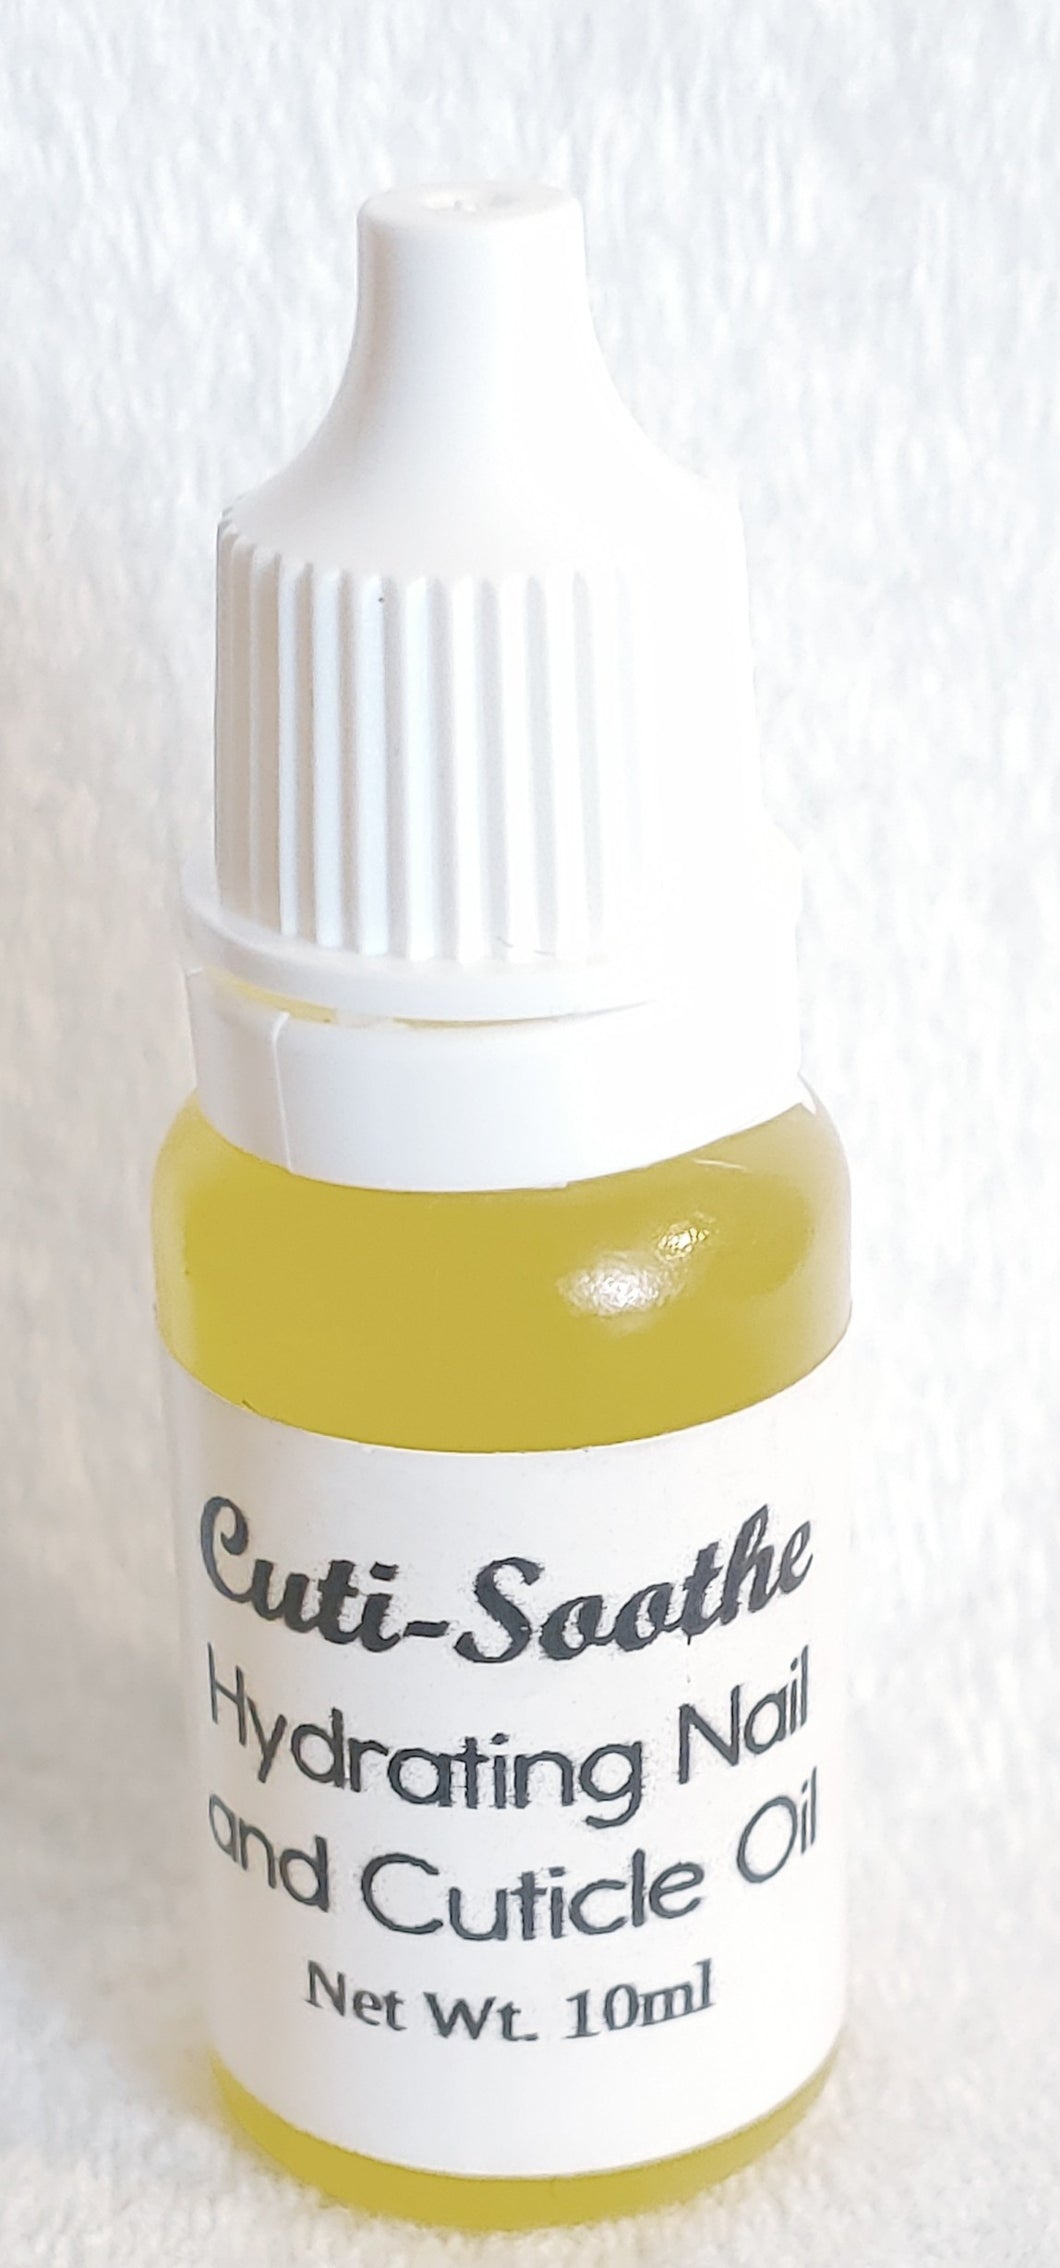 Cuti-Soothe - Nail and Cuticle Oil